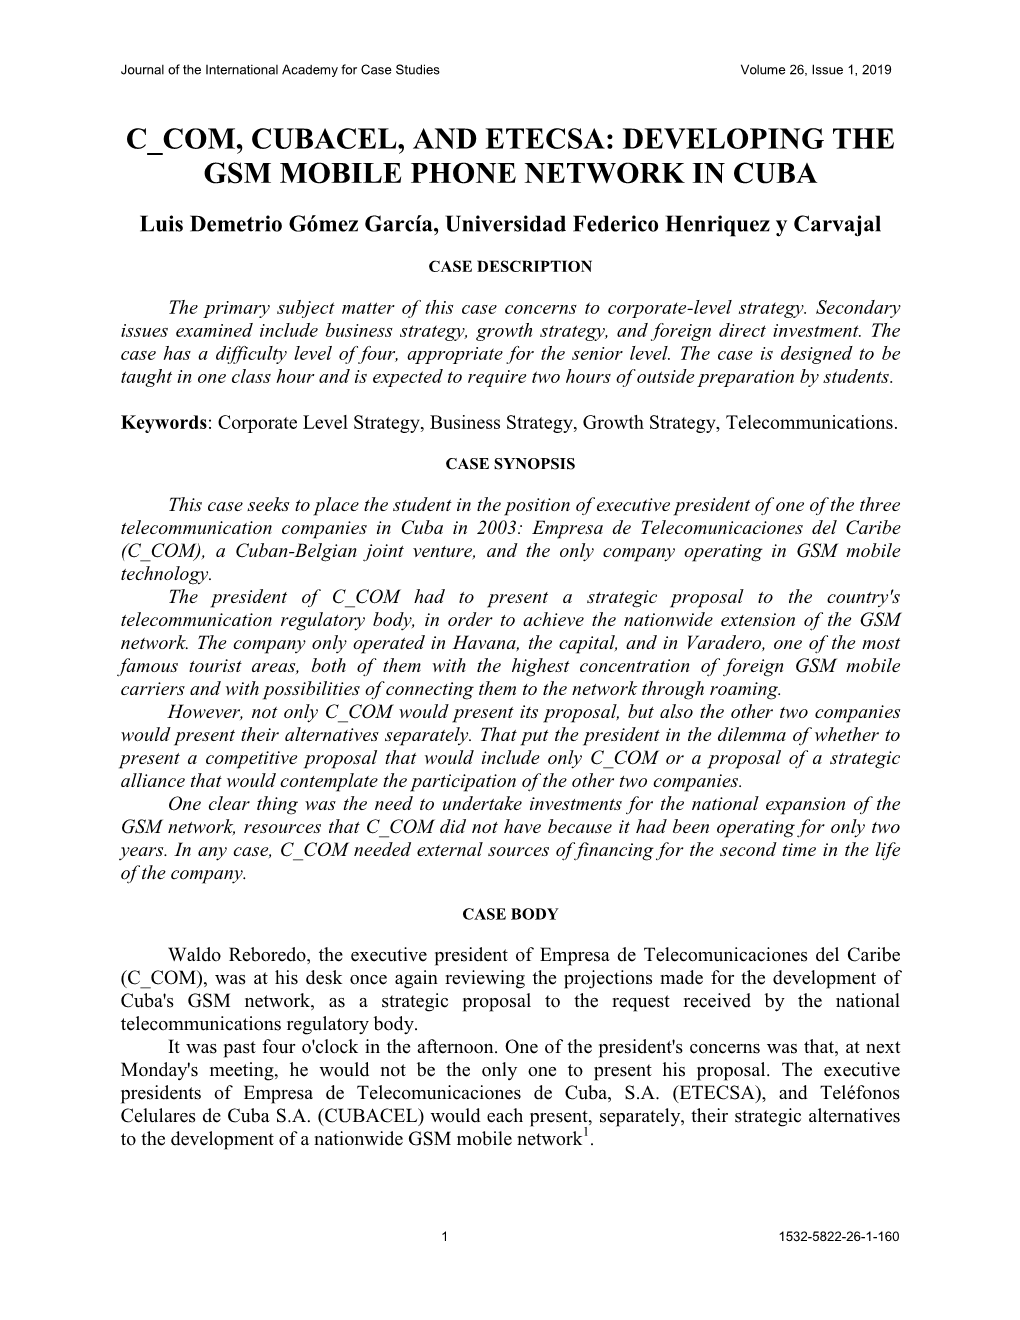 C Com, Cubacel, and Etecsa: Developing the Gsm Mobile Phone Network in Cuba